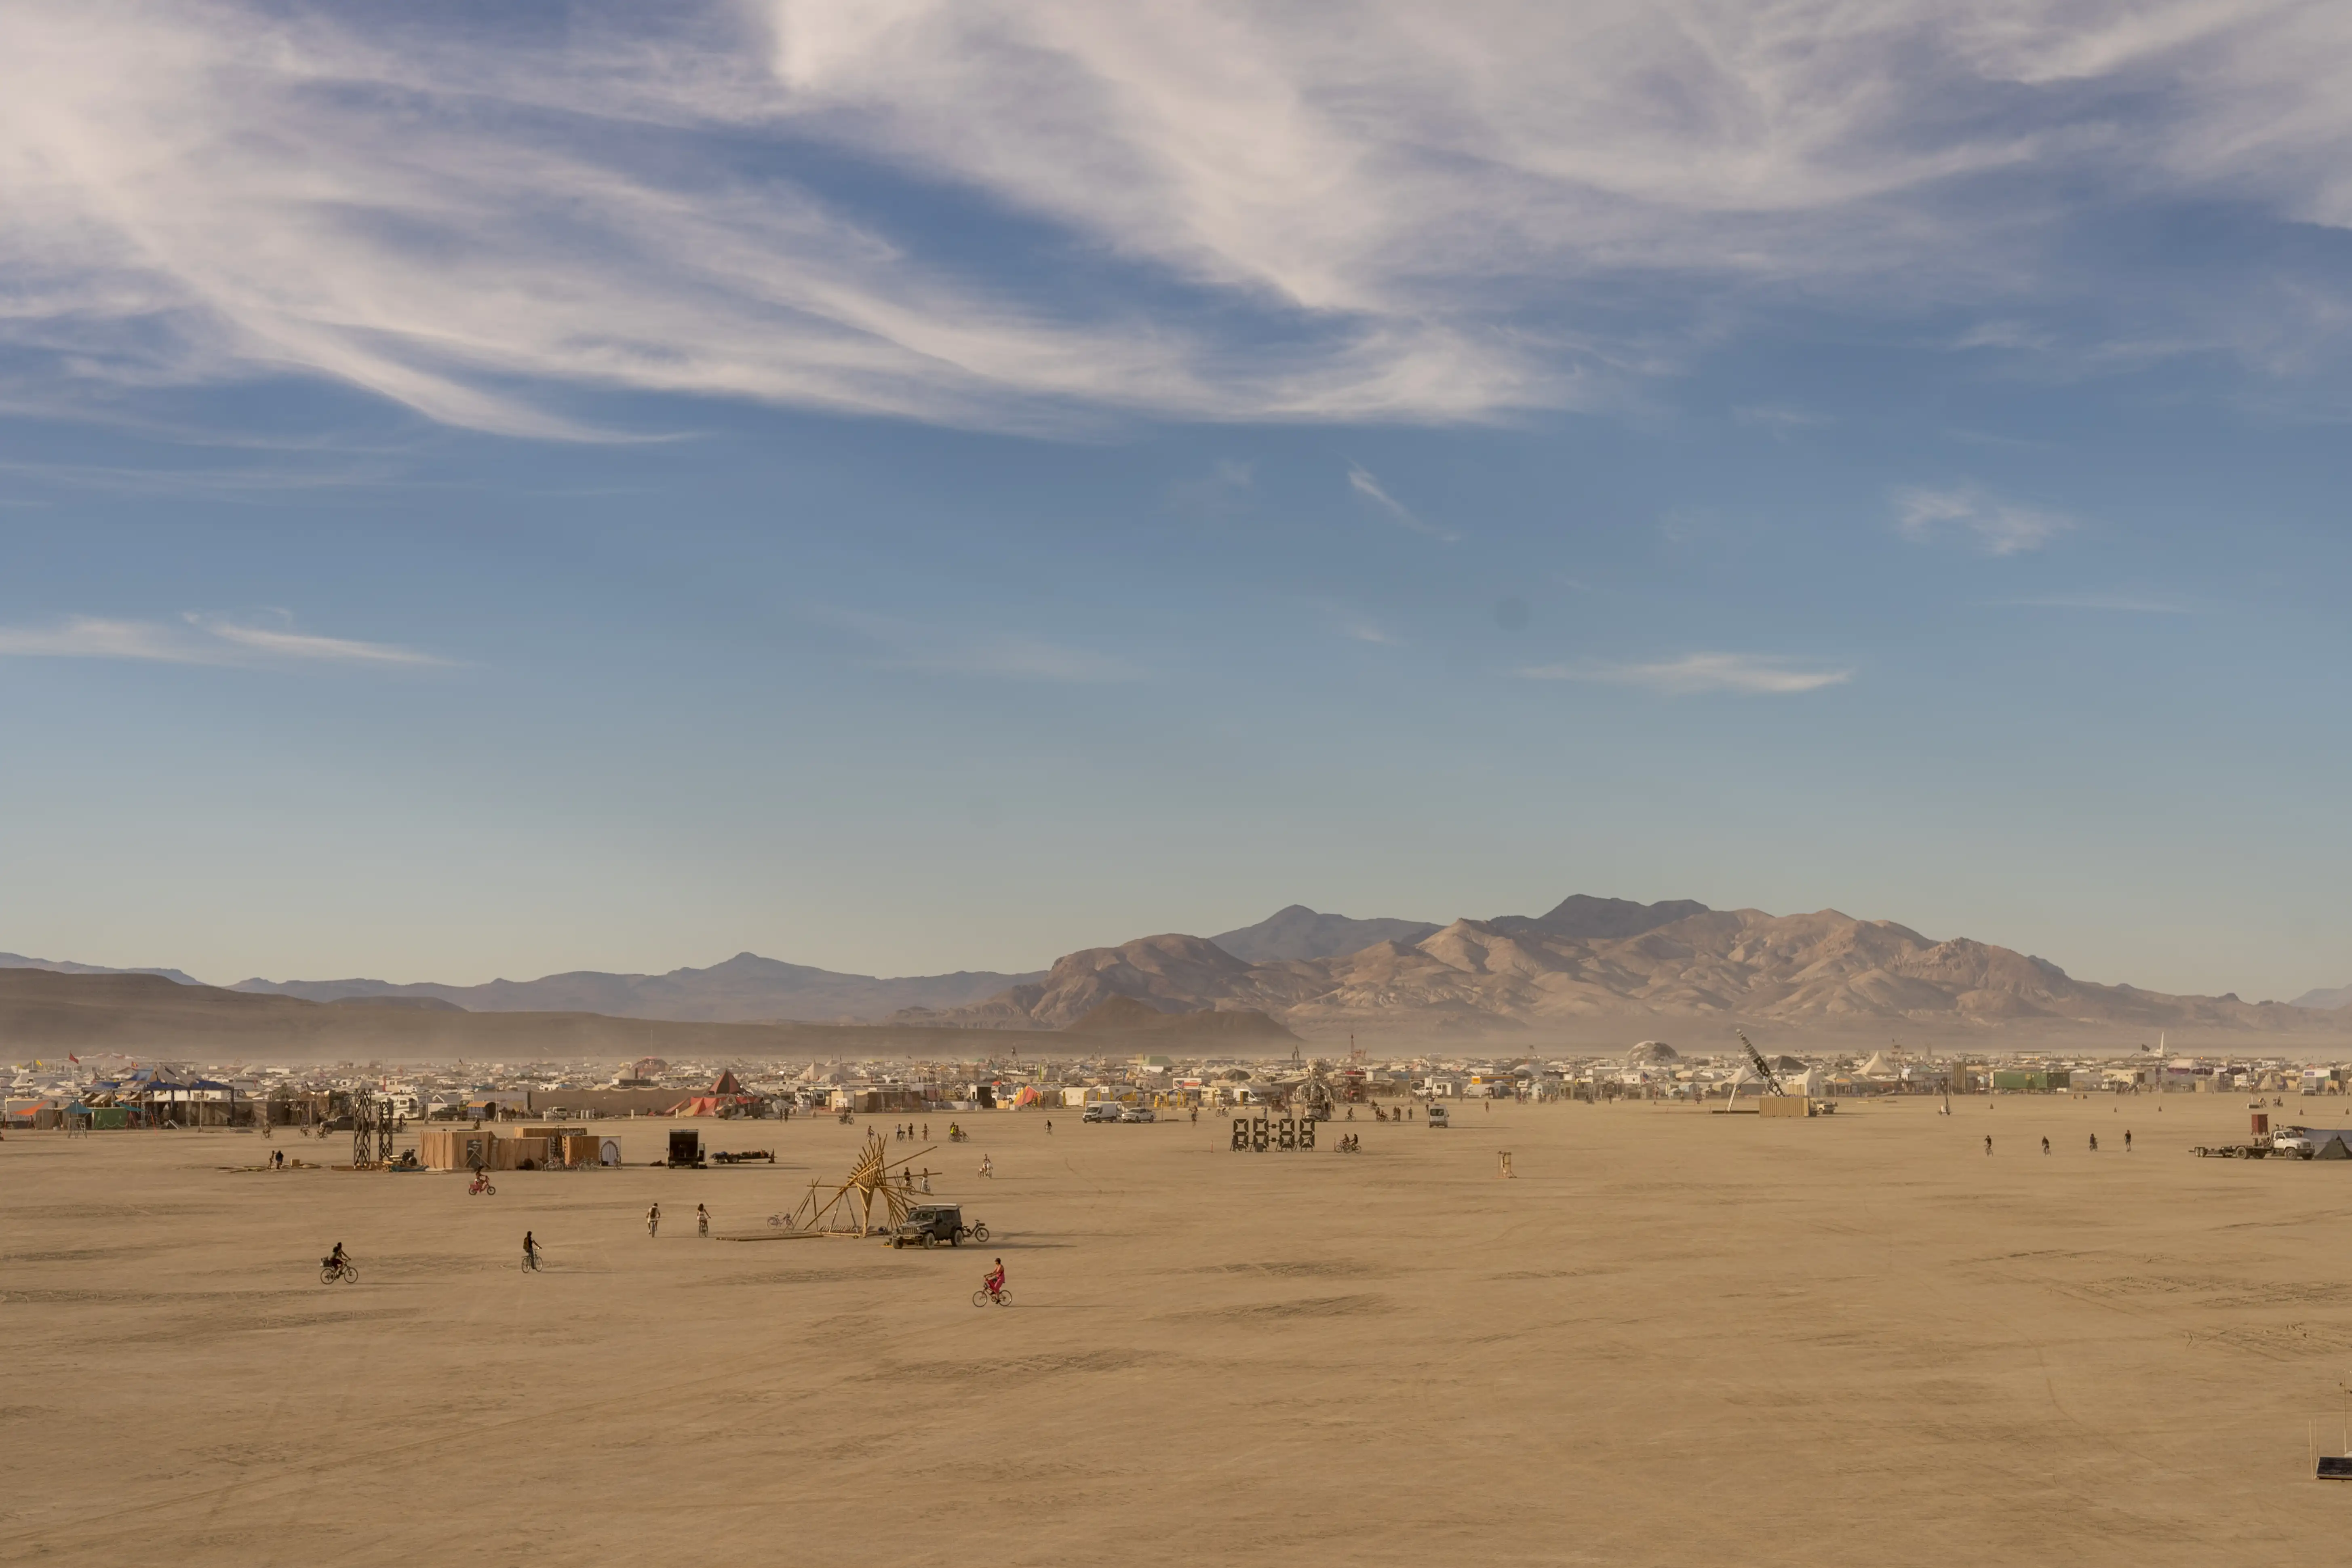 Panoramic view of the playa at Burning Man. In the foreground, the dusty desert with large sculptures sprinkled about. One structure is a digital 88:88, like a digital clock, about 10 feet tall. Burners are riding bicycles and walking around. In the midground, Black Rock City is visible in the form of tents, trucks, shade structures, and geodesic domes. In the background, the mountains. The sky is blue with a few wispy clouds.